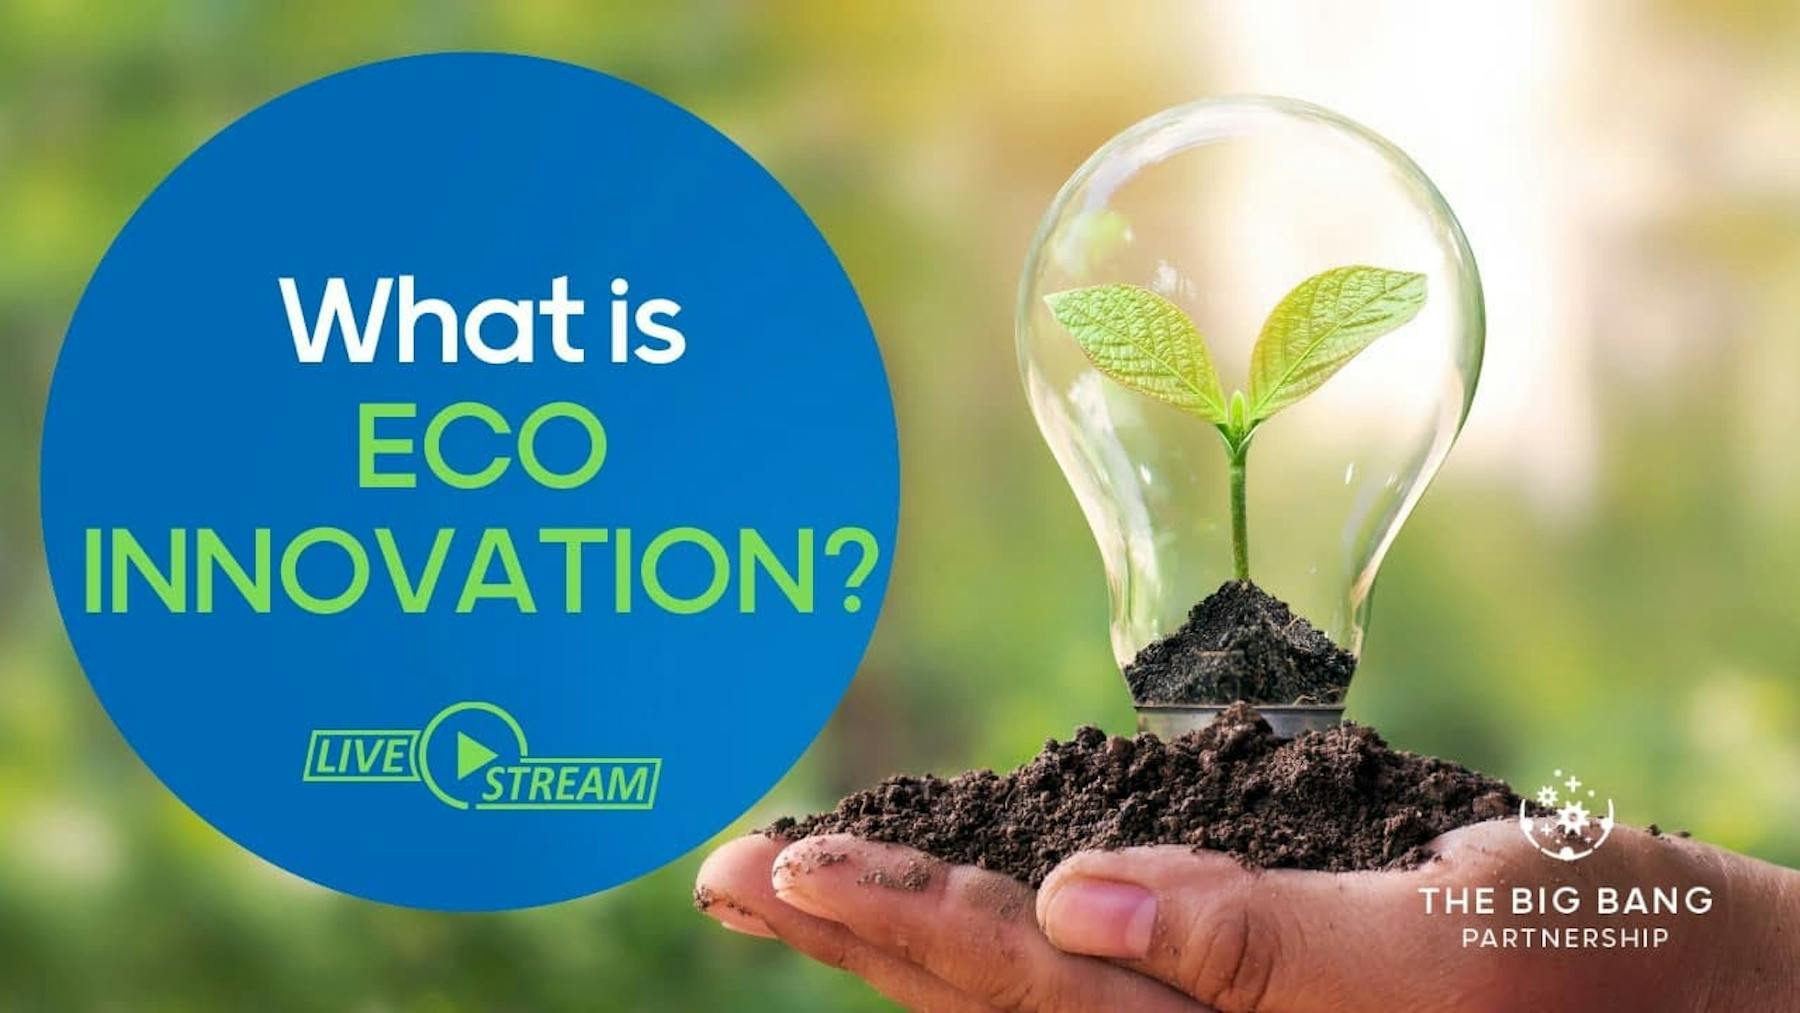 what is eco innovation?